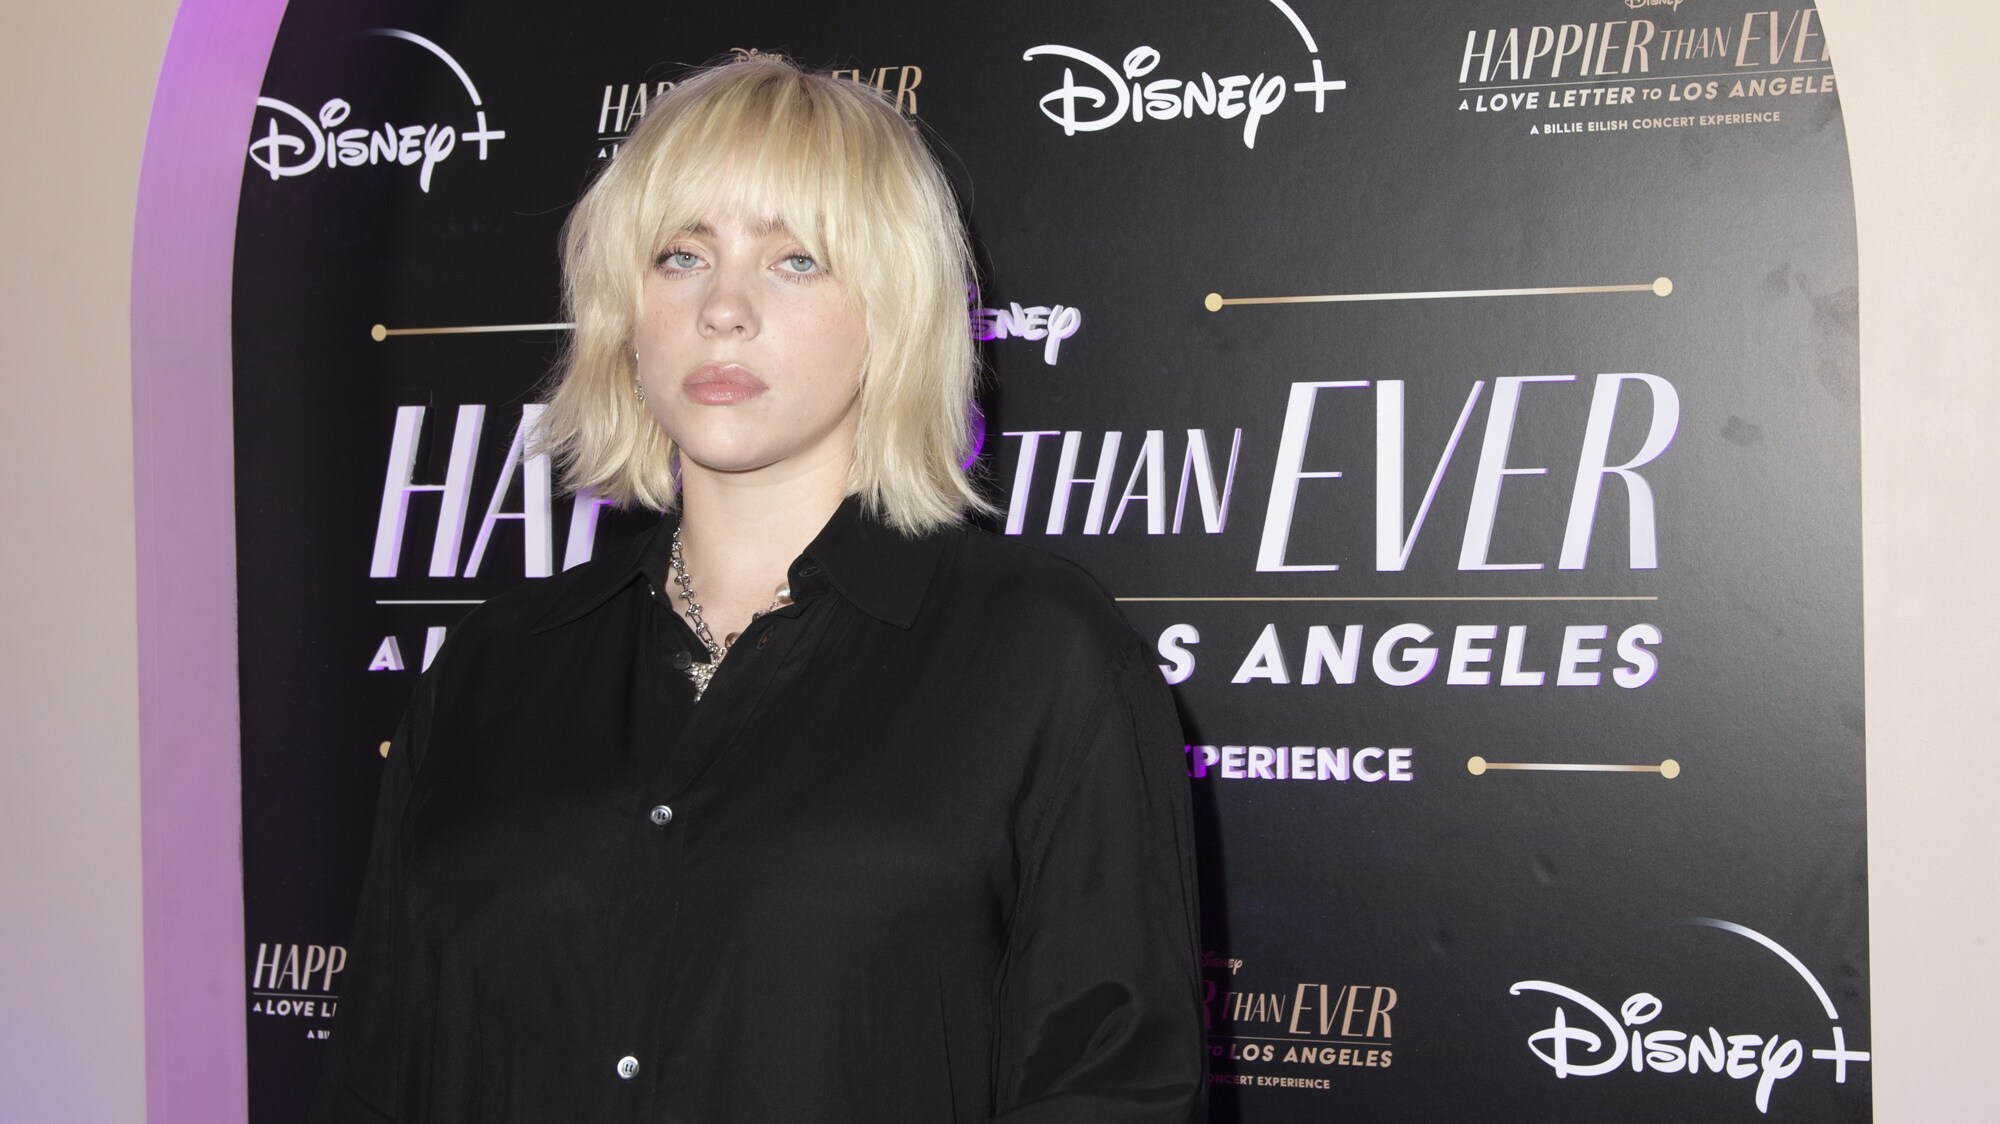 HAPPIER THAN EVER: A LOVE LETTER TO LOS ANGELES - Stars celebrated at the drive-in world premiere of the Disney+ original film, “Happier Than Ever: A Love Letter to Los Angeles,” a Billie Eilish concert experience, at The Grove in Los Angeles, Calif., Monday, August 30, 2021. (Disney/Kyusung Gong) BILLIE EILISH